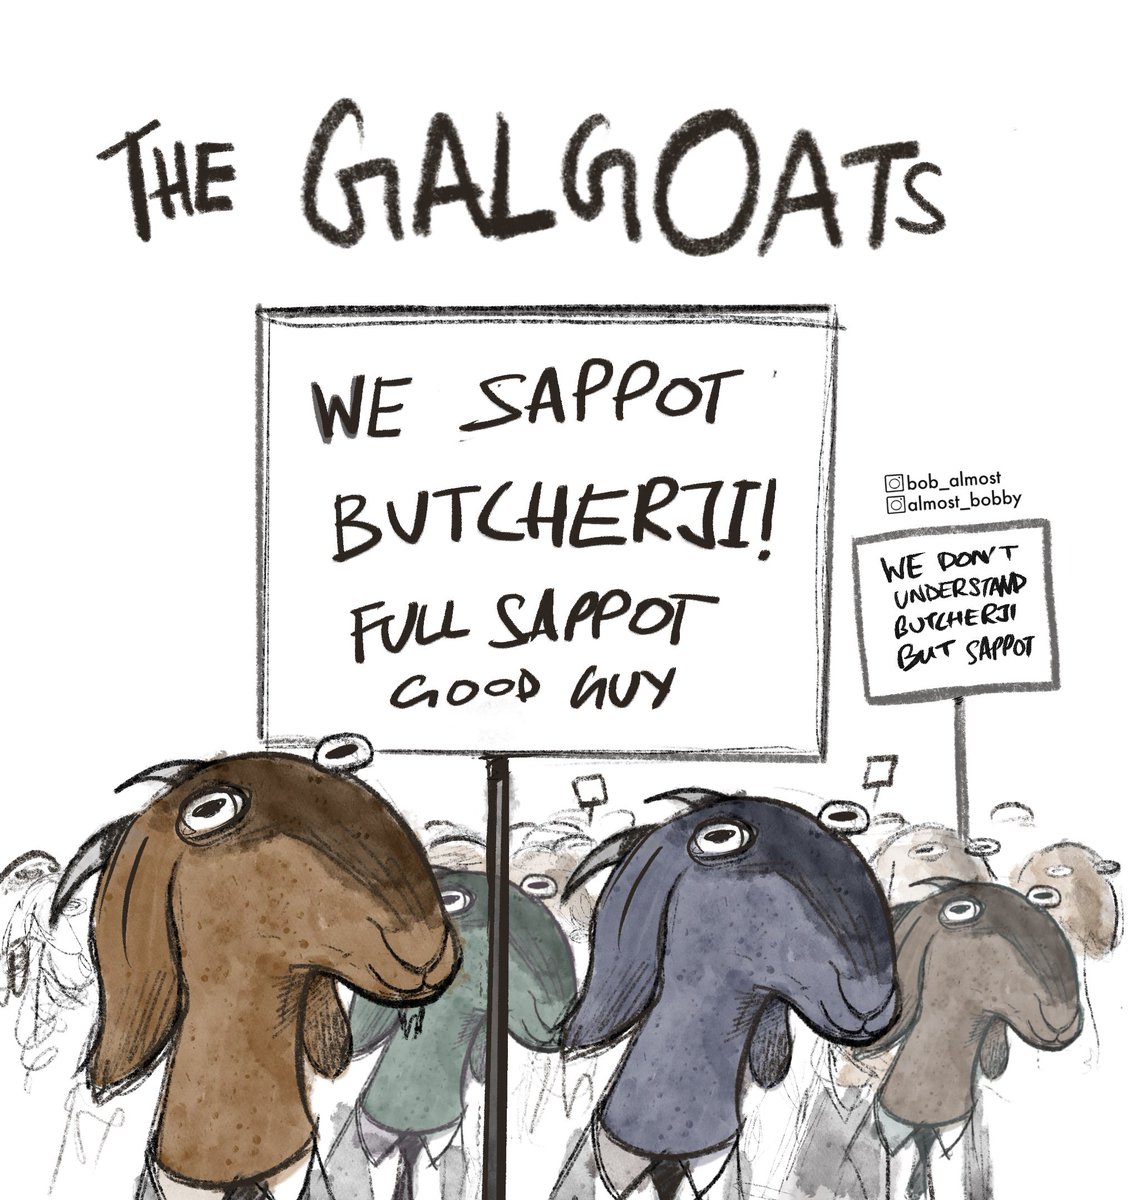 The Galgoats . . by @Bobby_almost and @bob_almost . . #GalgotiaUniversity